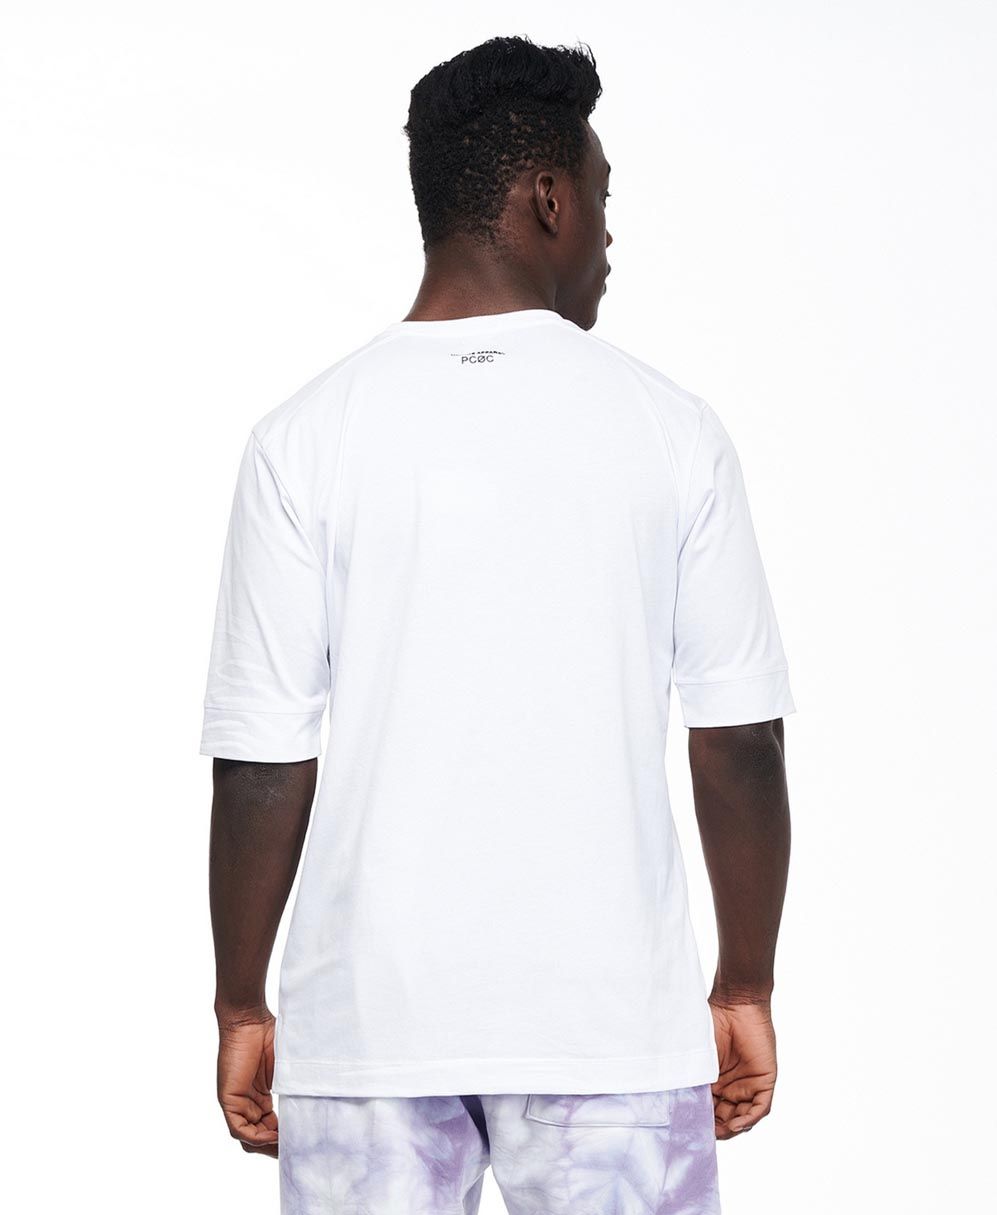 leukh white t-shirt p/coc me stampa lost my mind